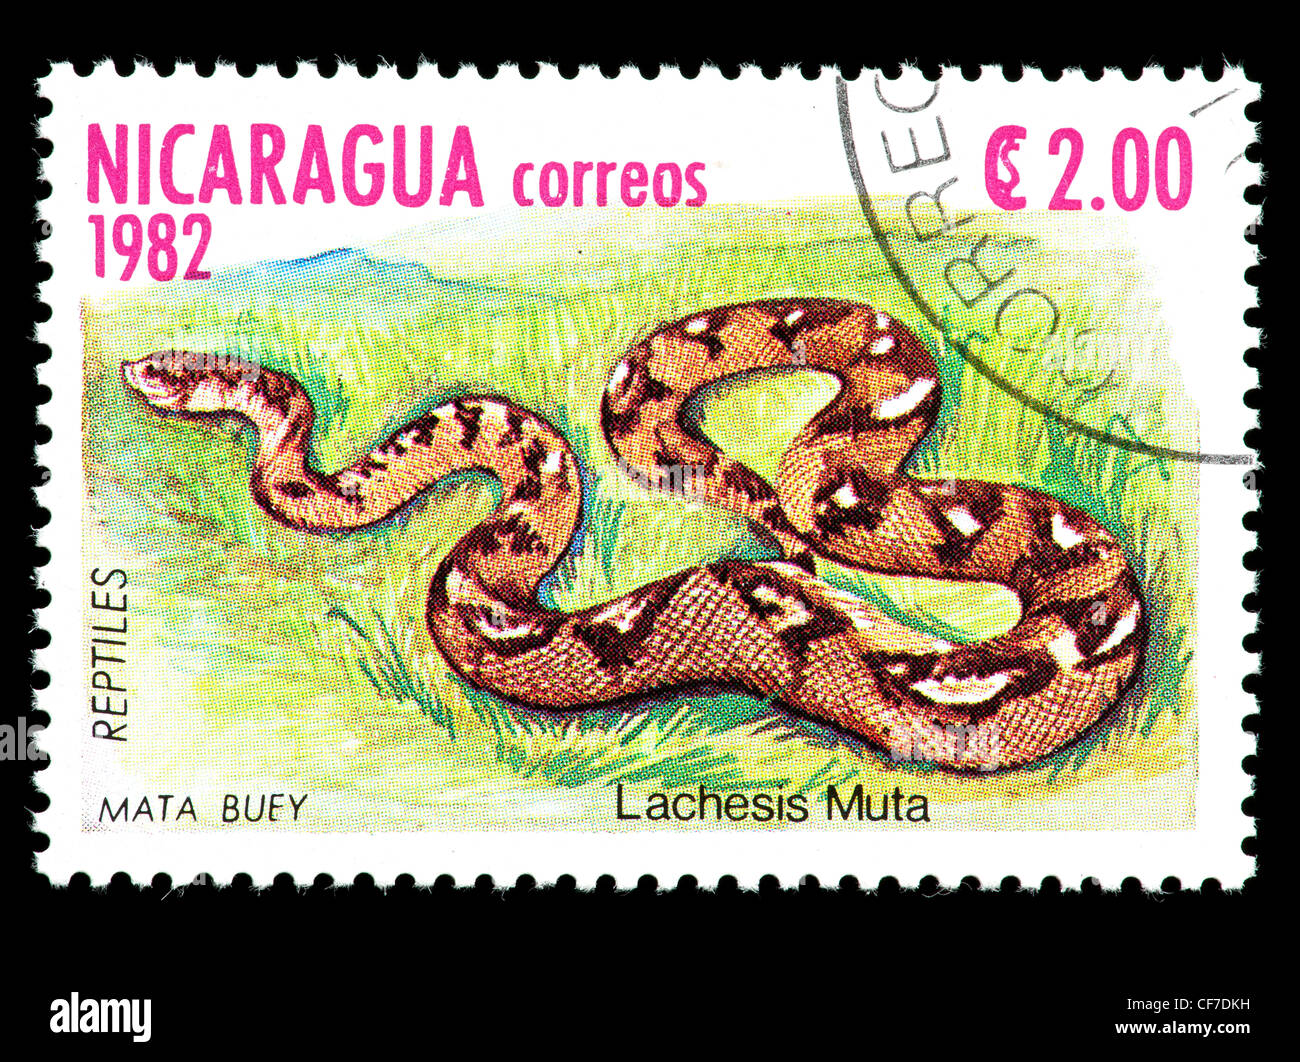 Postage stamp from Nicaragua depicting Bushmaster snake (Lachesis muta) Stock Photo